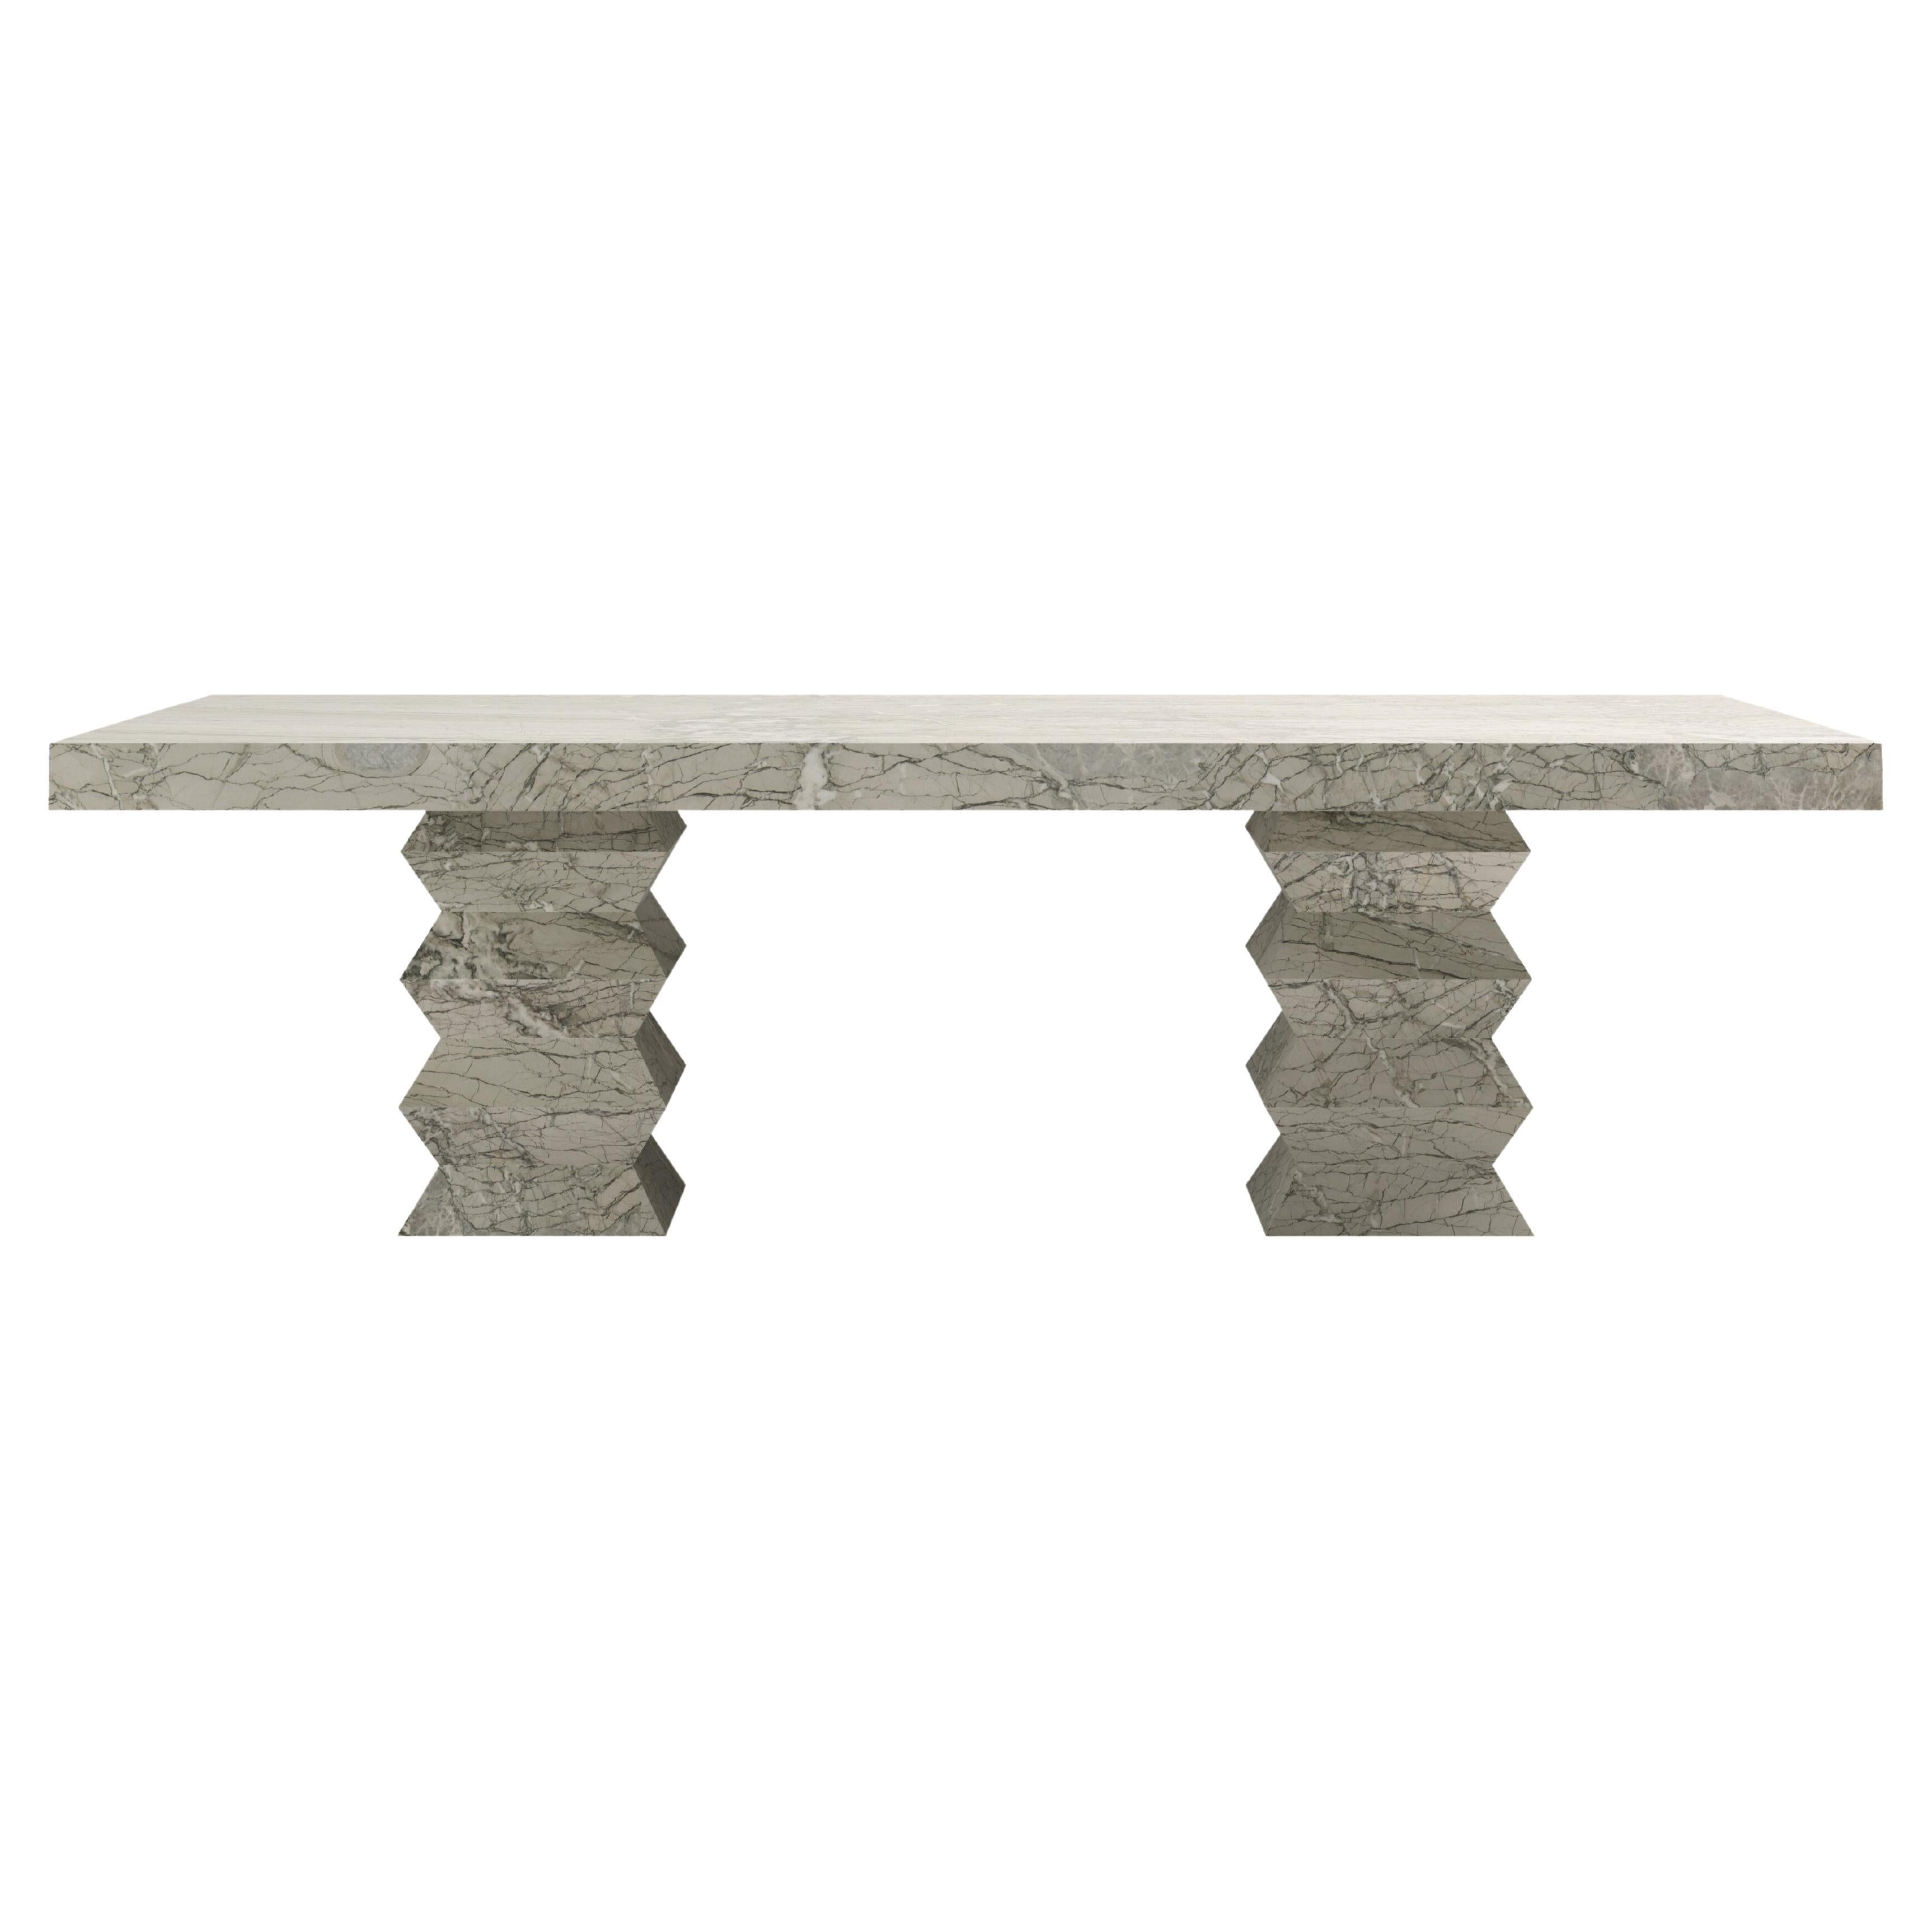 FORM(LA) Grinza Rectangle Dining Table 108"L x 48"W x 32"H Verde Antigua Marble For Sale